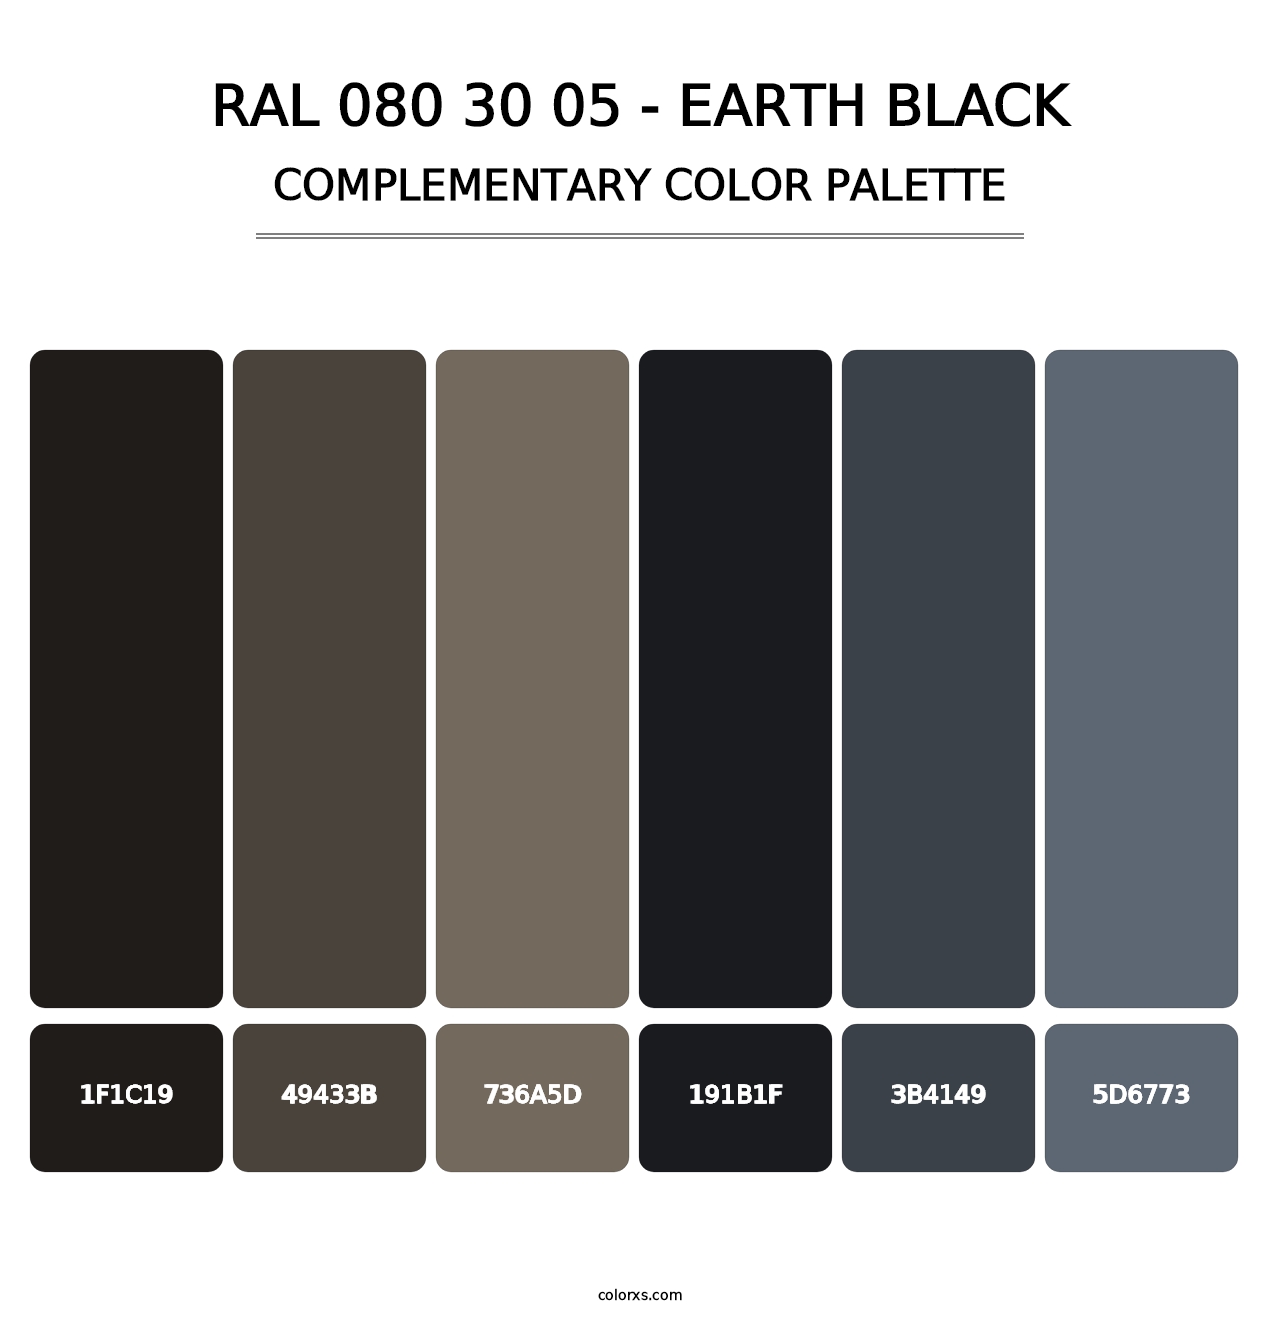 RAL 080 30 05 - Earth Black - Complementary Color Palette